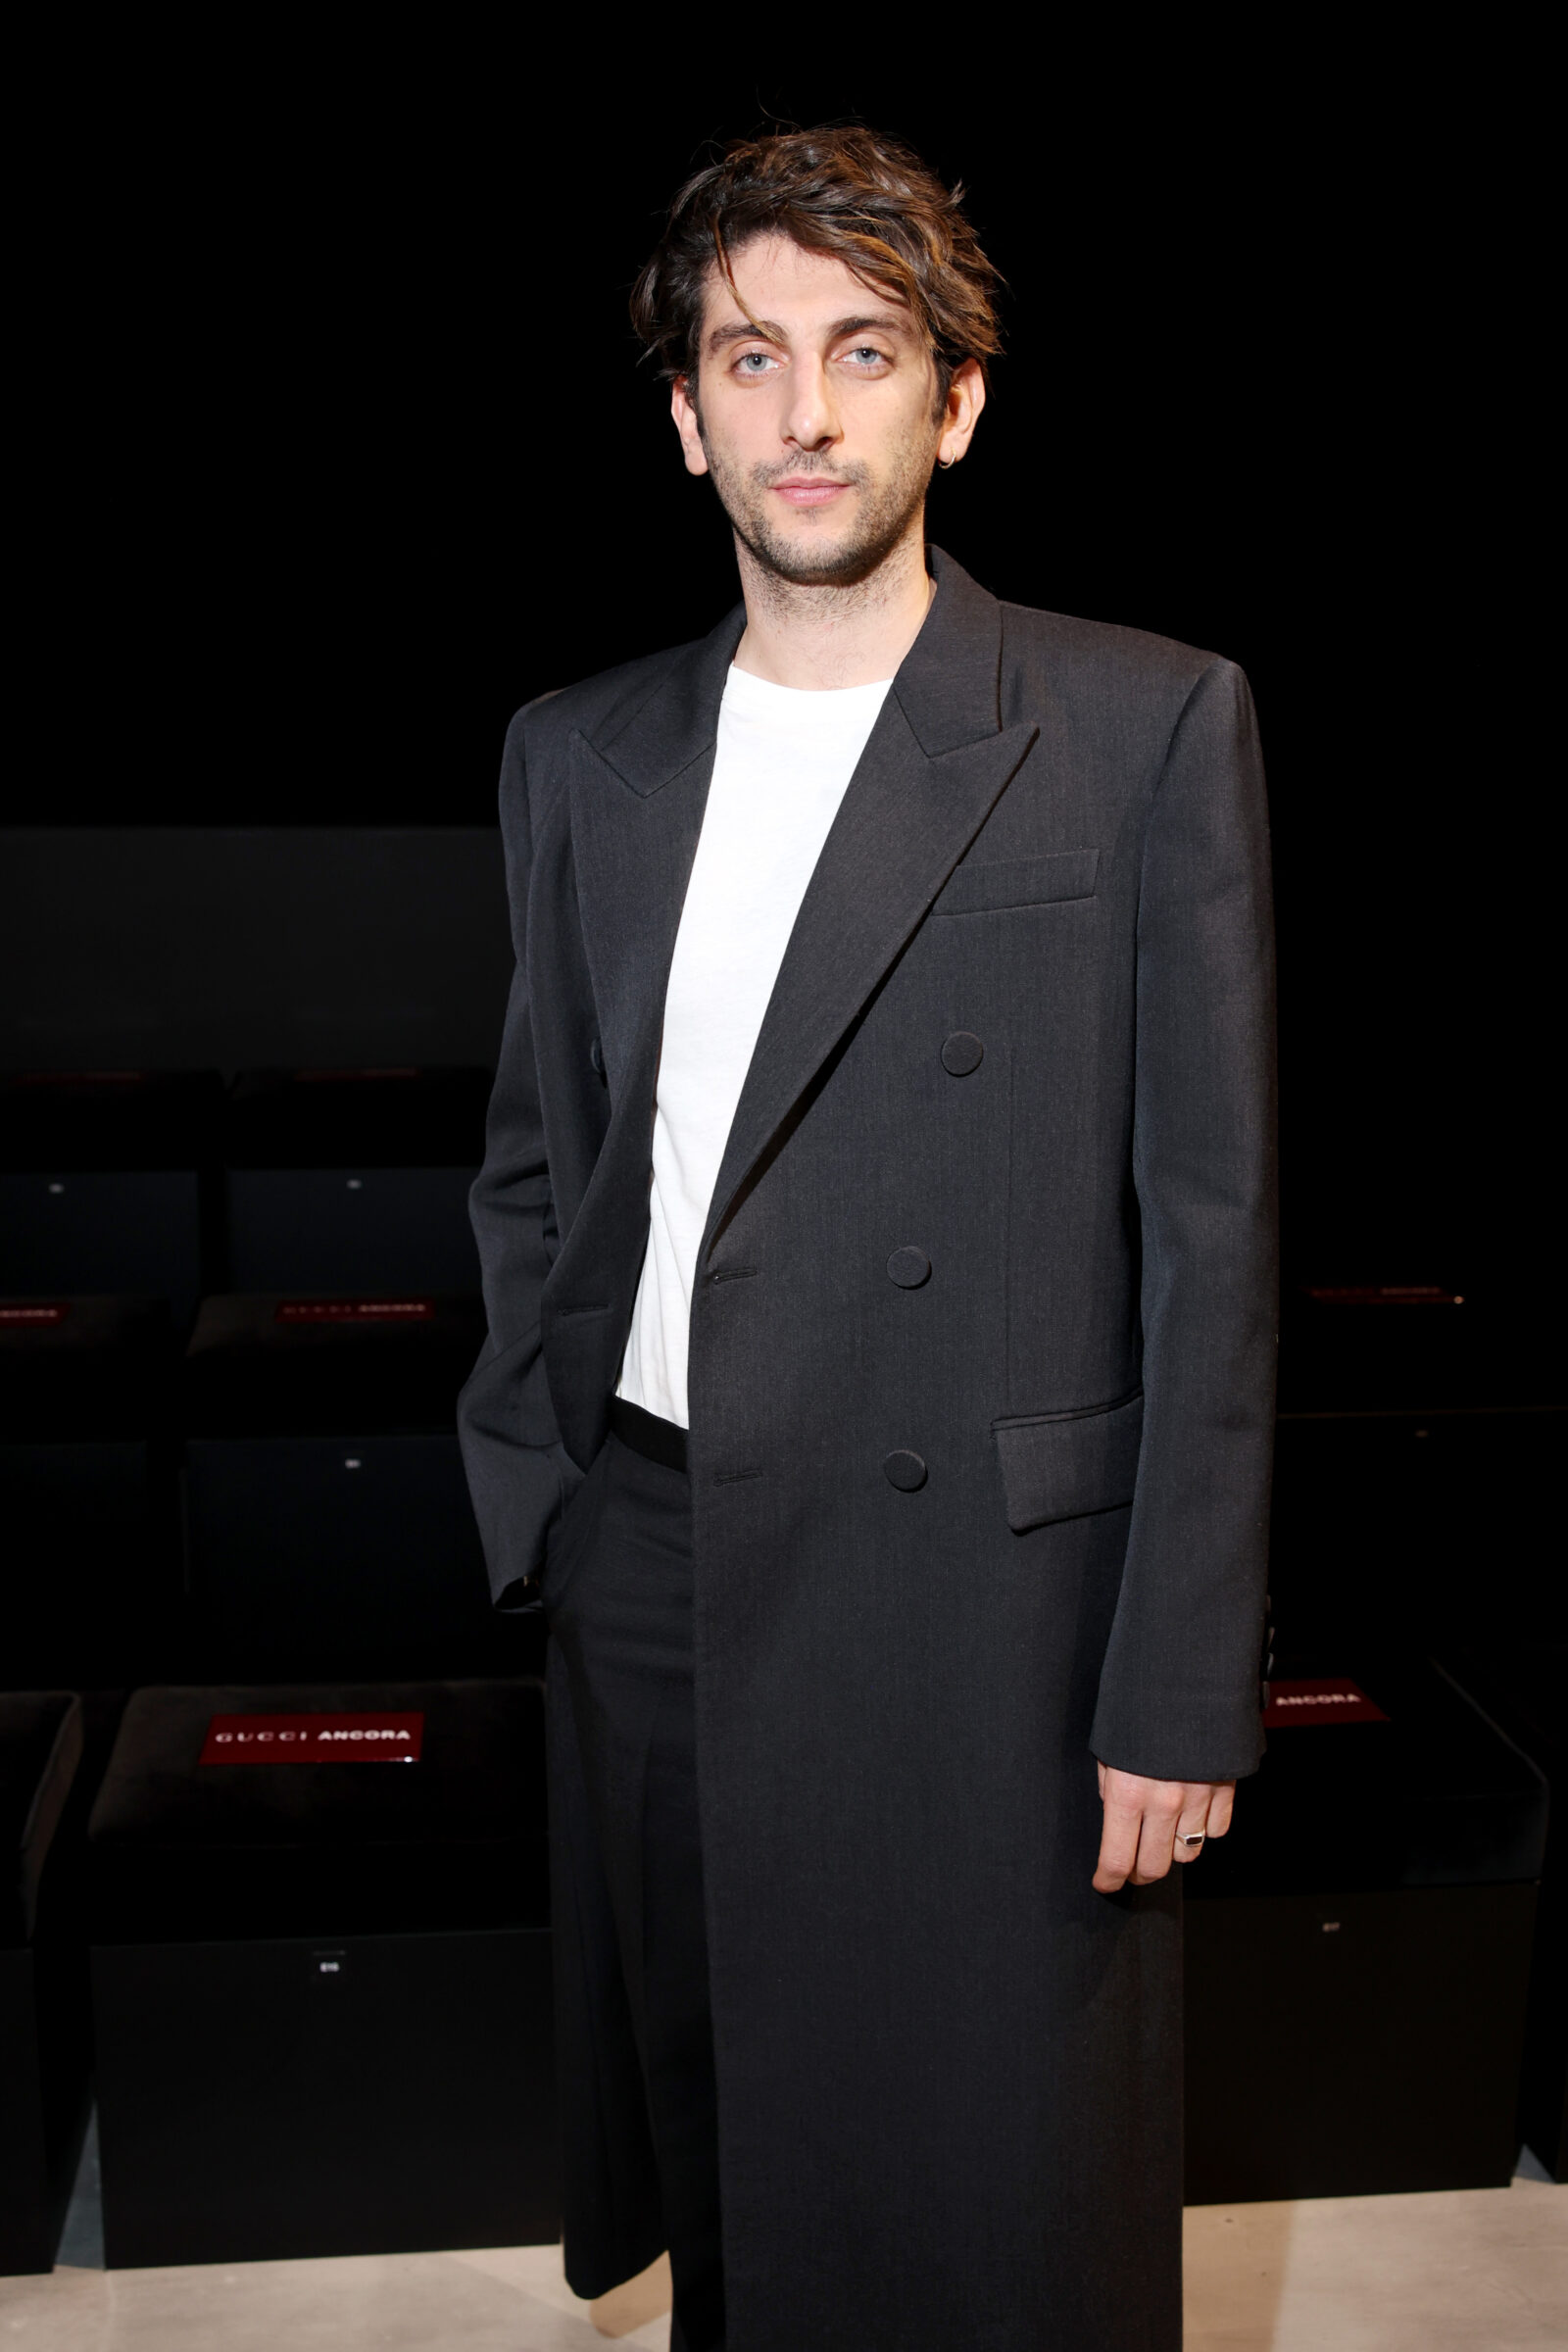 Pietro Castellitto attends the Gucci Ancora Fashion Show during Milan Fashion Week 